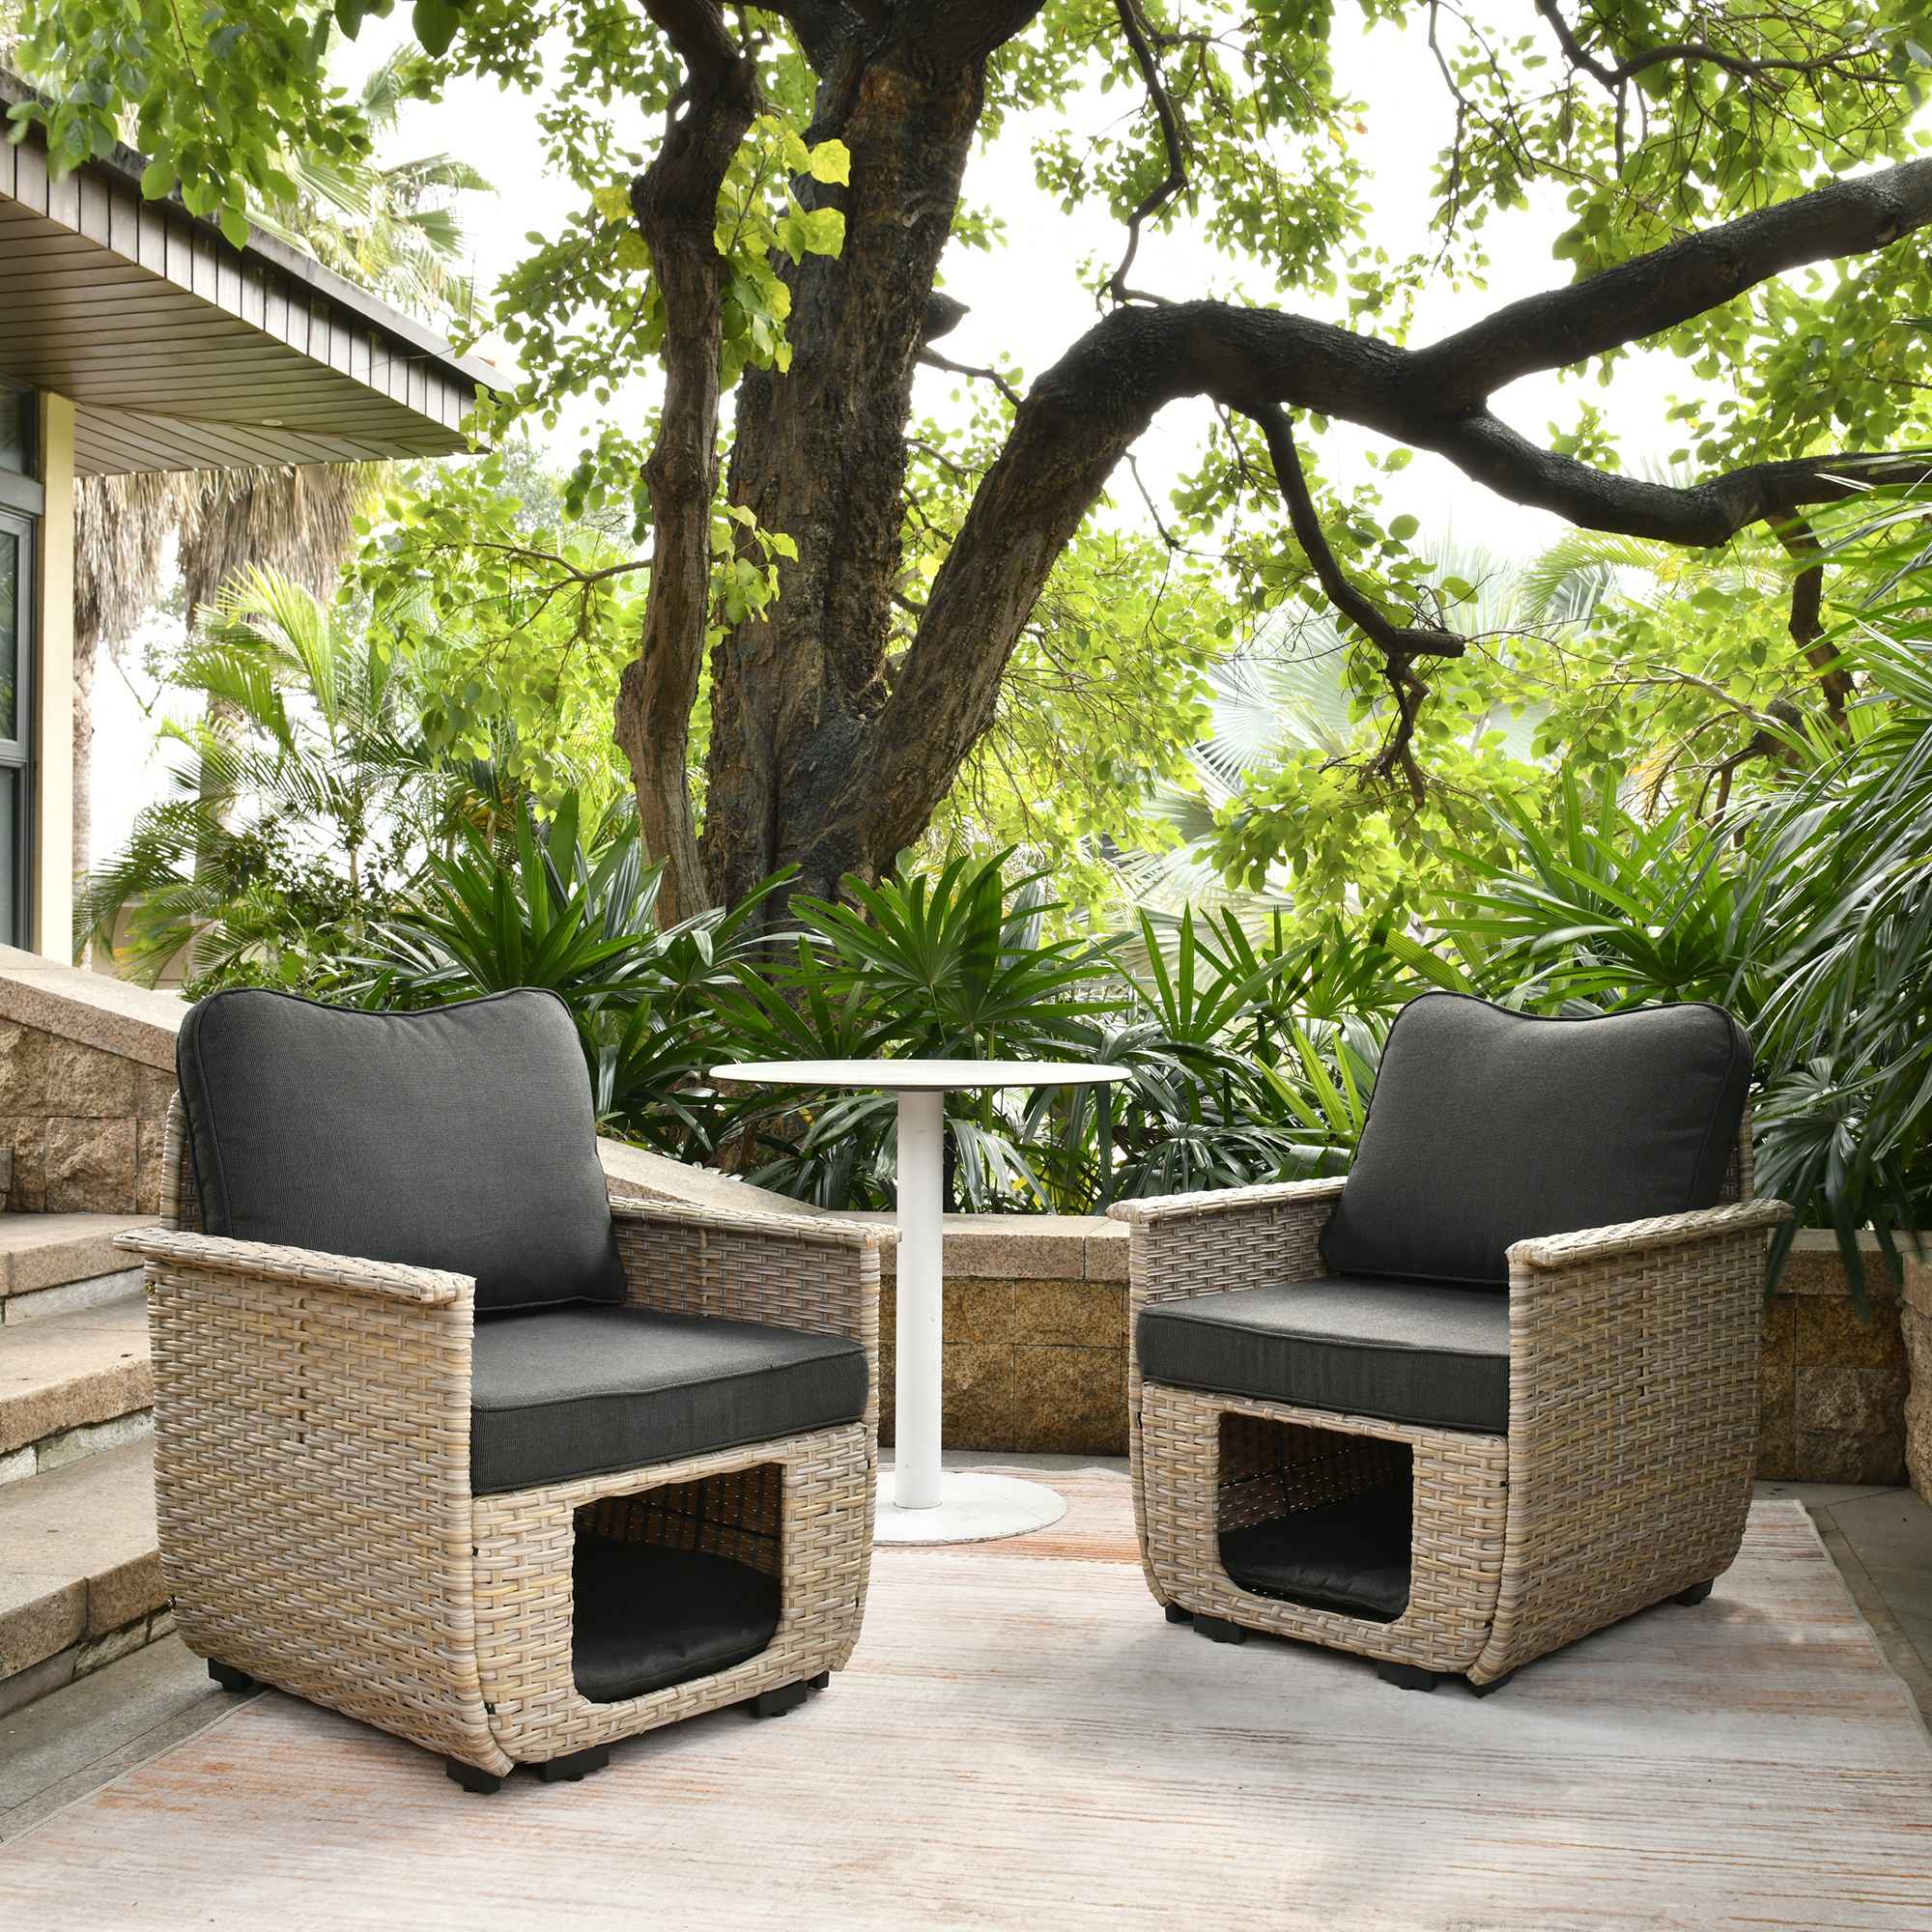 Ovios Patio Chairs Beige Wicker 2 Pieces with Multifunctional Storage